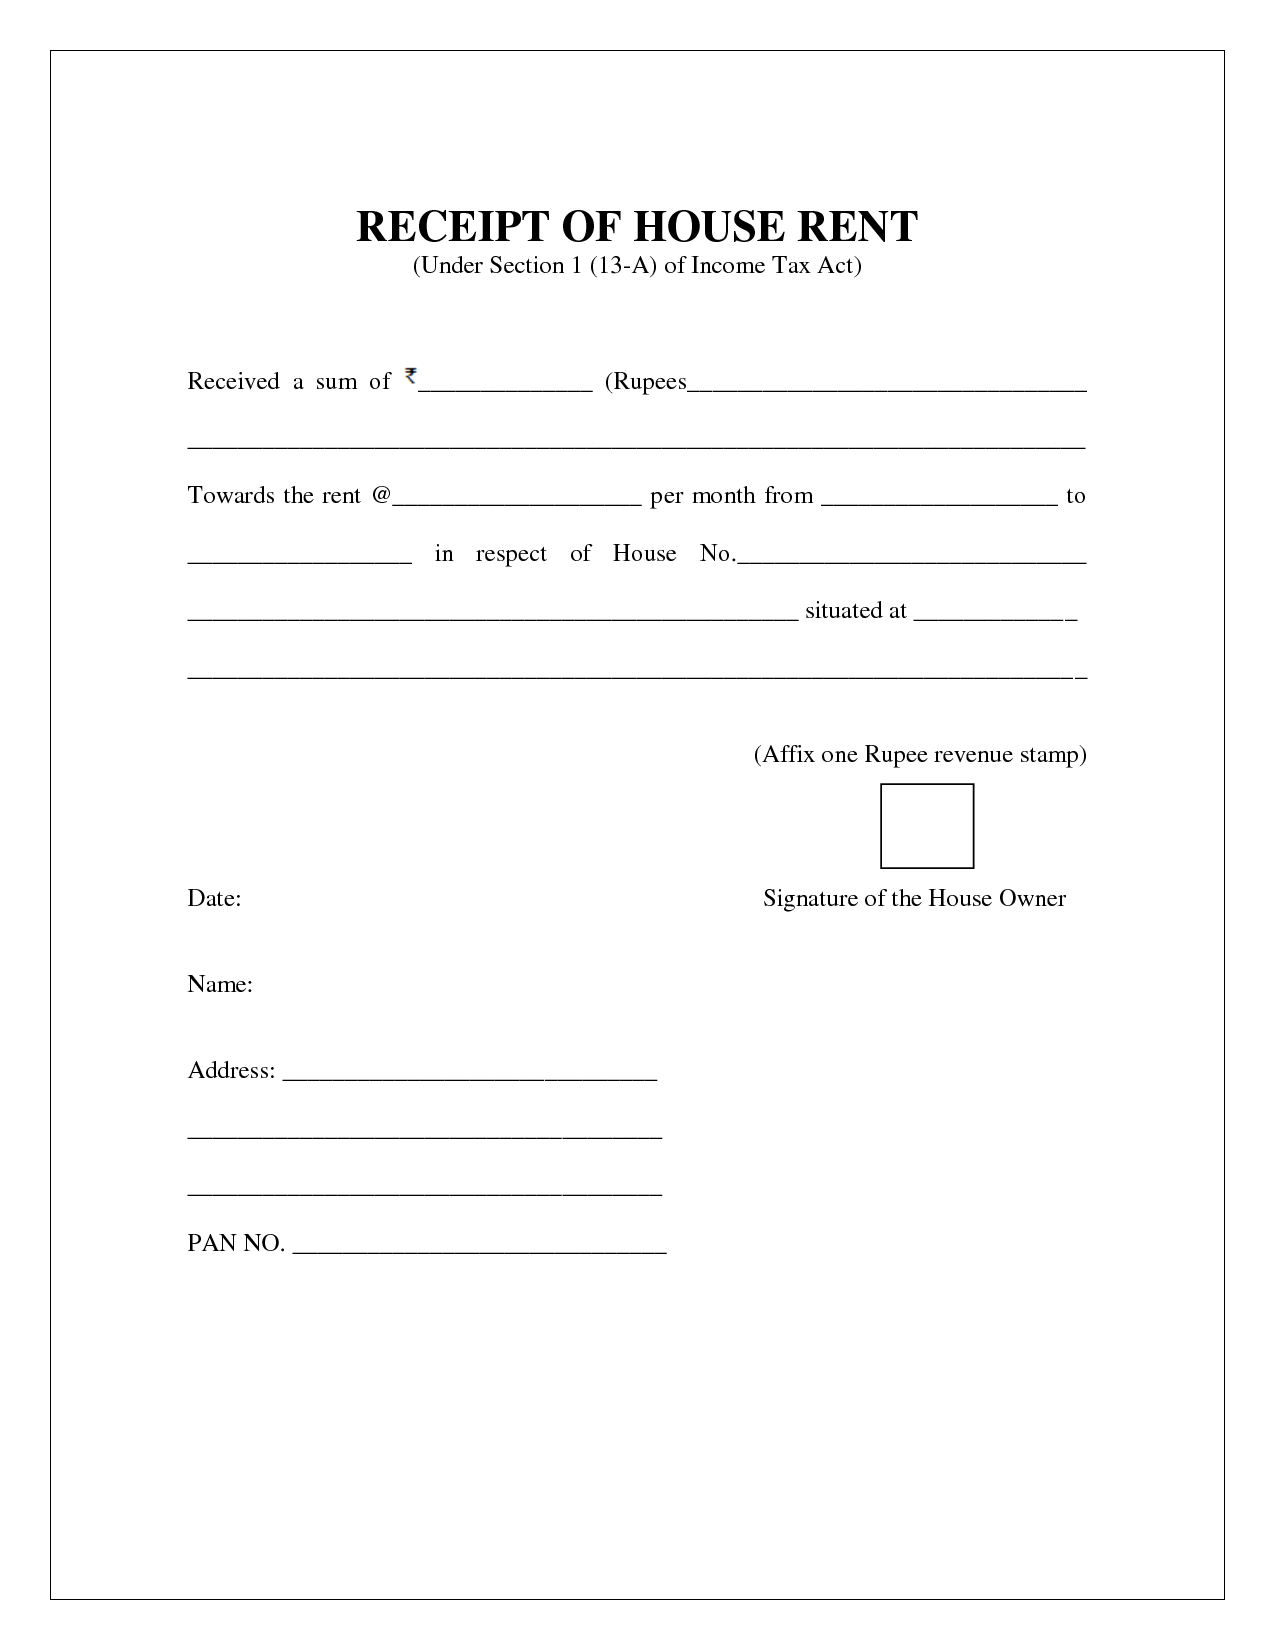 house-rent-receipt-format-in-india-invoice-template